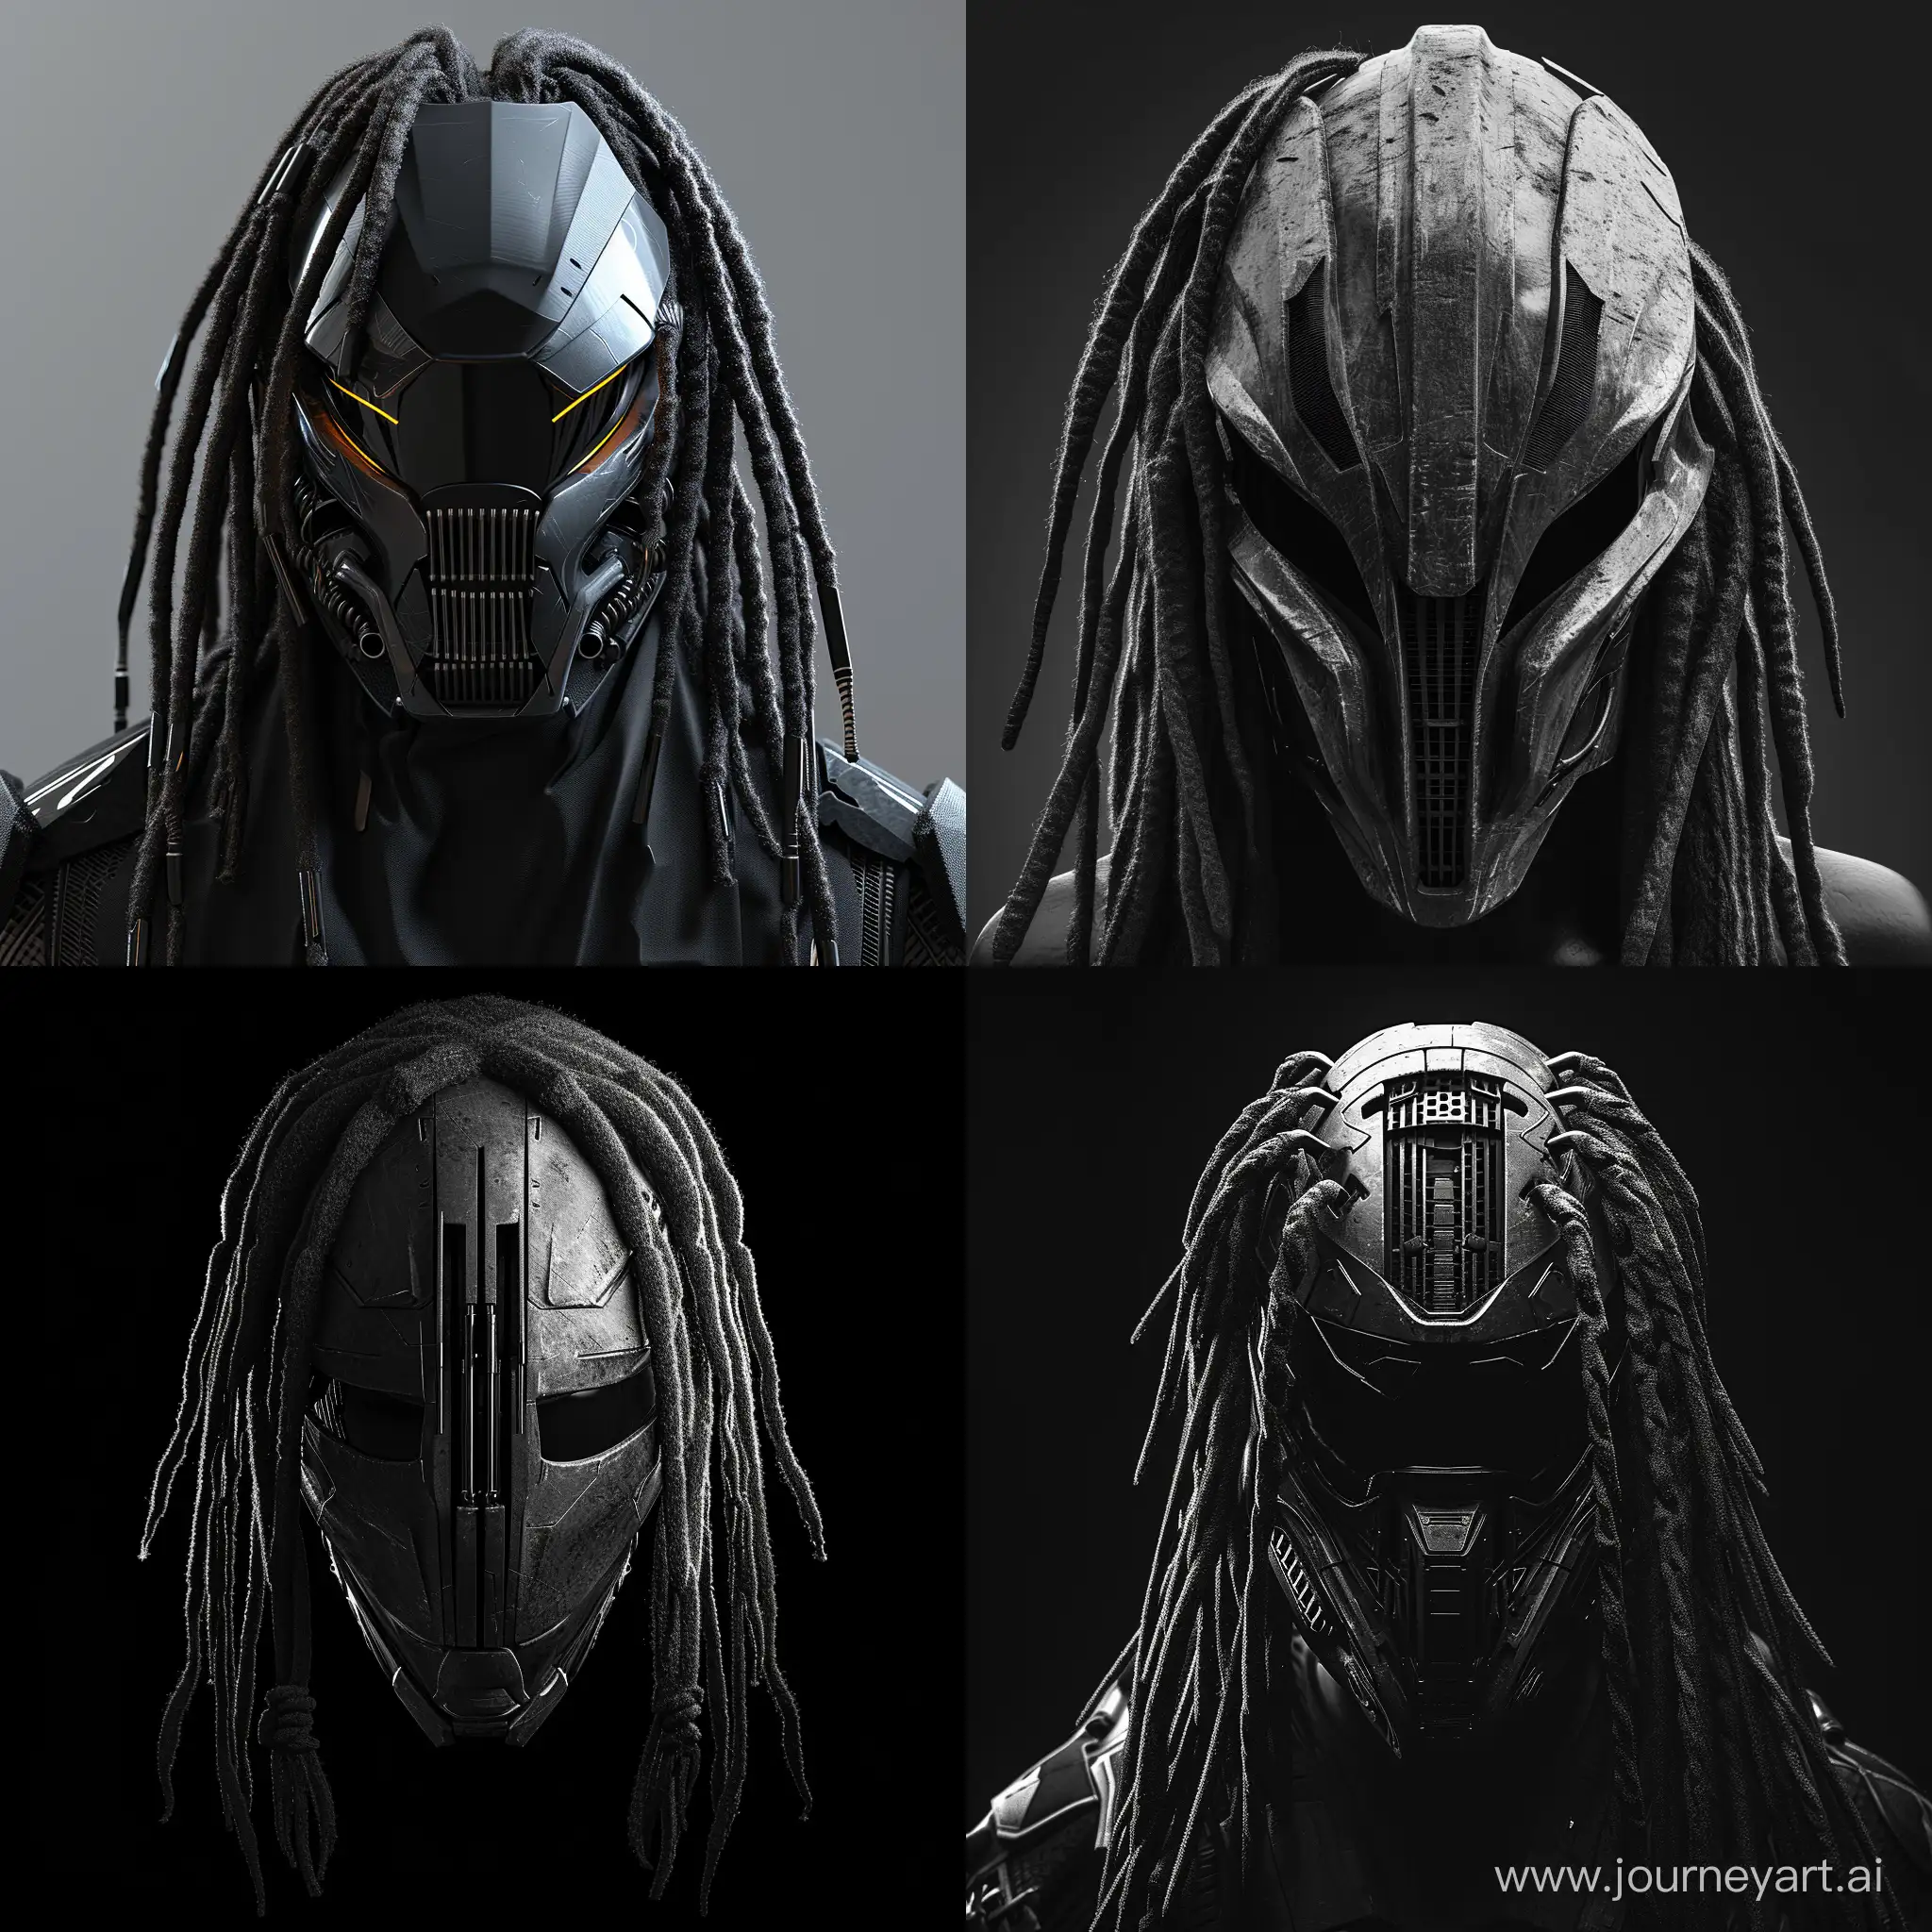 SciFi-Mask-with-Dreadlock-Hair-and-Concealed-Eyes